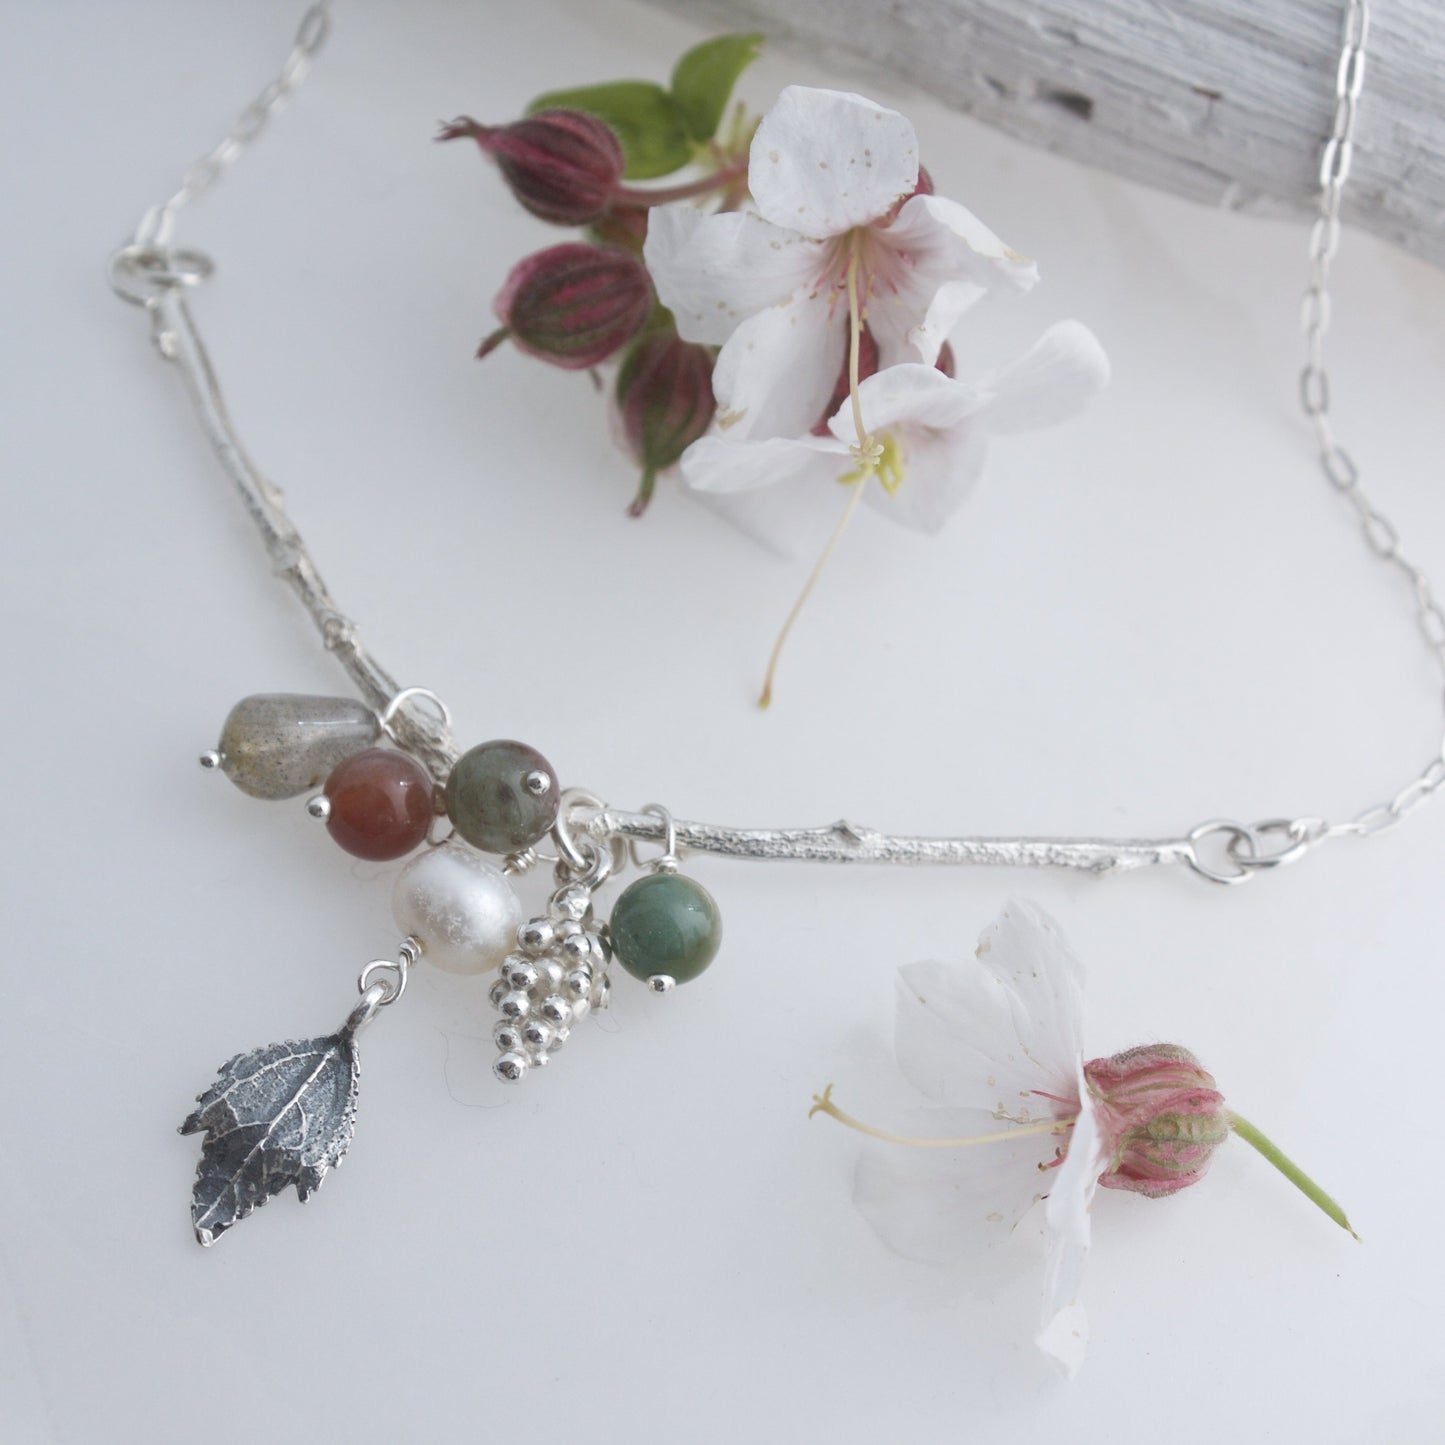 Autumn Cluster Necklace, Leaf and Berry Necklace